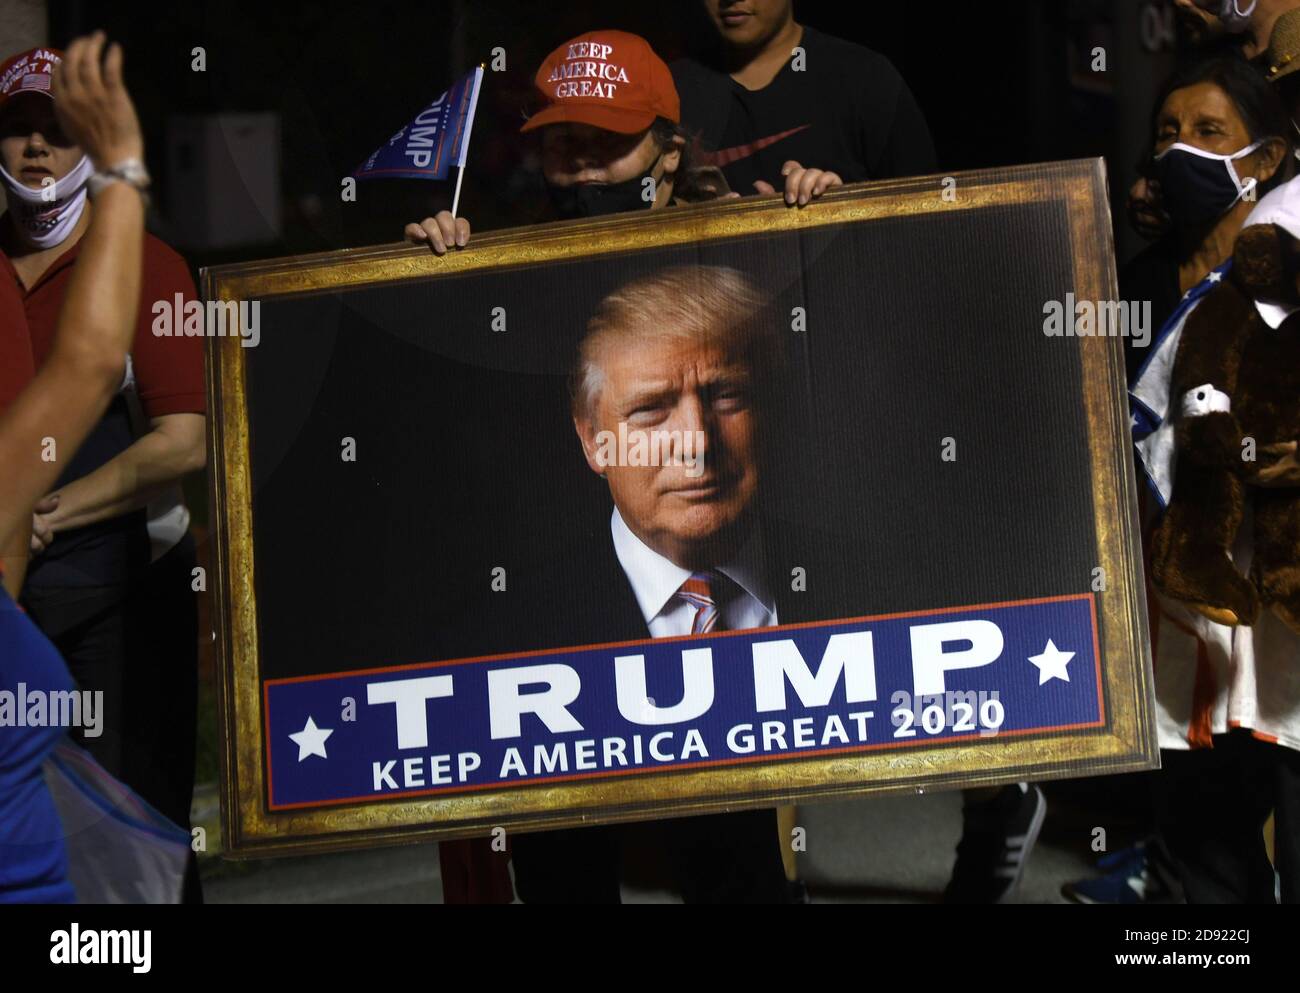 Opa Locka, United States. 01st Nov, 2020. November 1, 2020 - Opa-Locka, Florida, United States - People wait in line to hear U.S. President Donald Trump speak at a campaign rally at Miami-Opa Locka Executive Airport on November 1, 2020 in Opa-Locka, Florida. President Trump held events in five states today, as he continues his campaign against Democratic presidential nominee Joe Biden two days before the November 3 election. Credit: Paul Hennessy/Alamy Live News Stock Photo